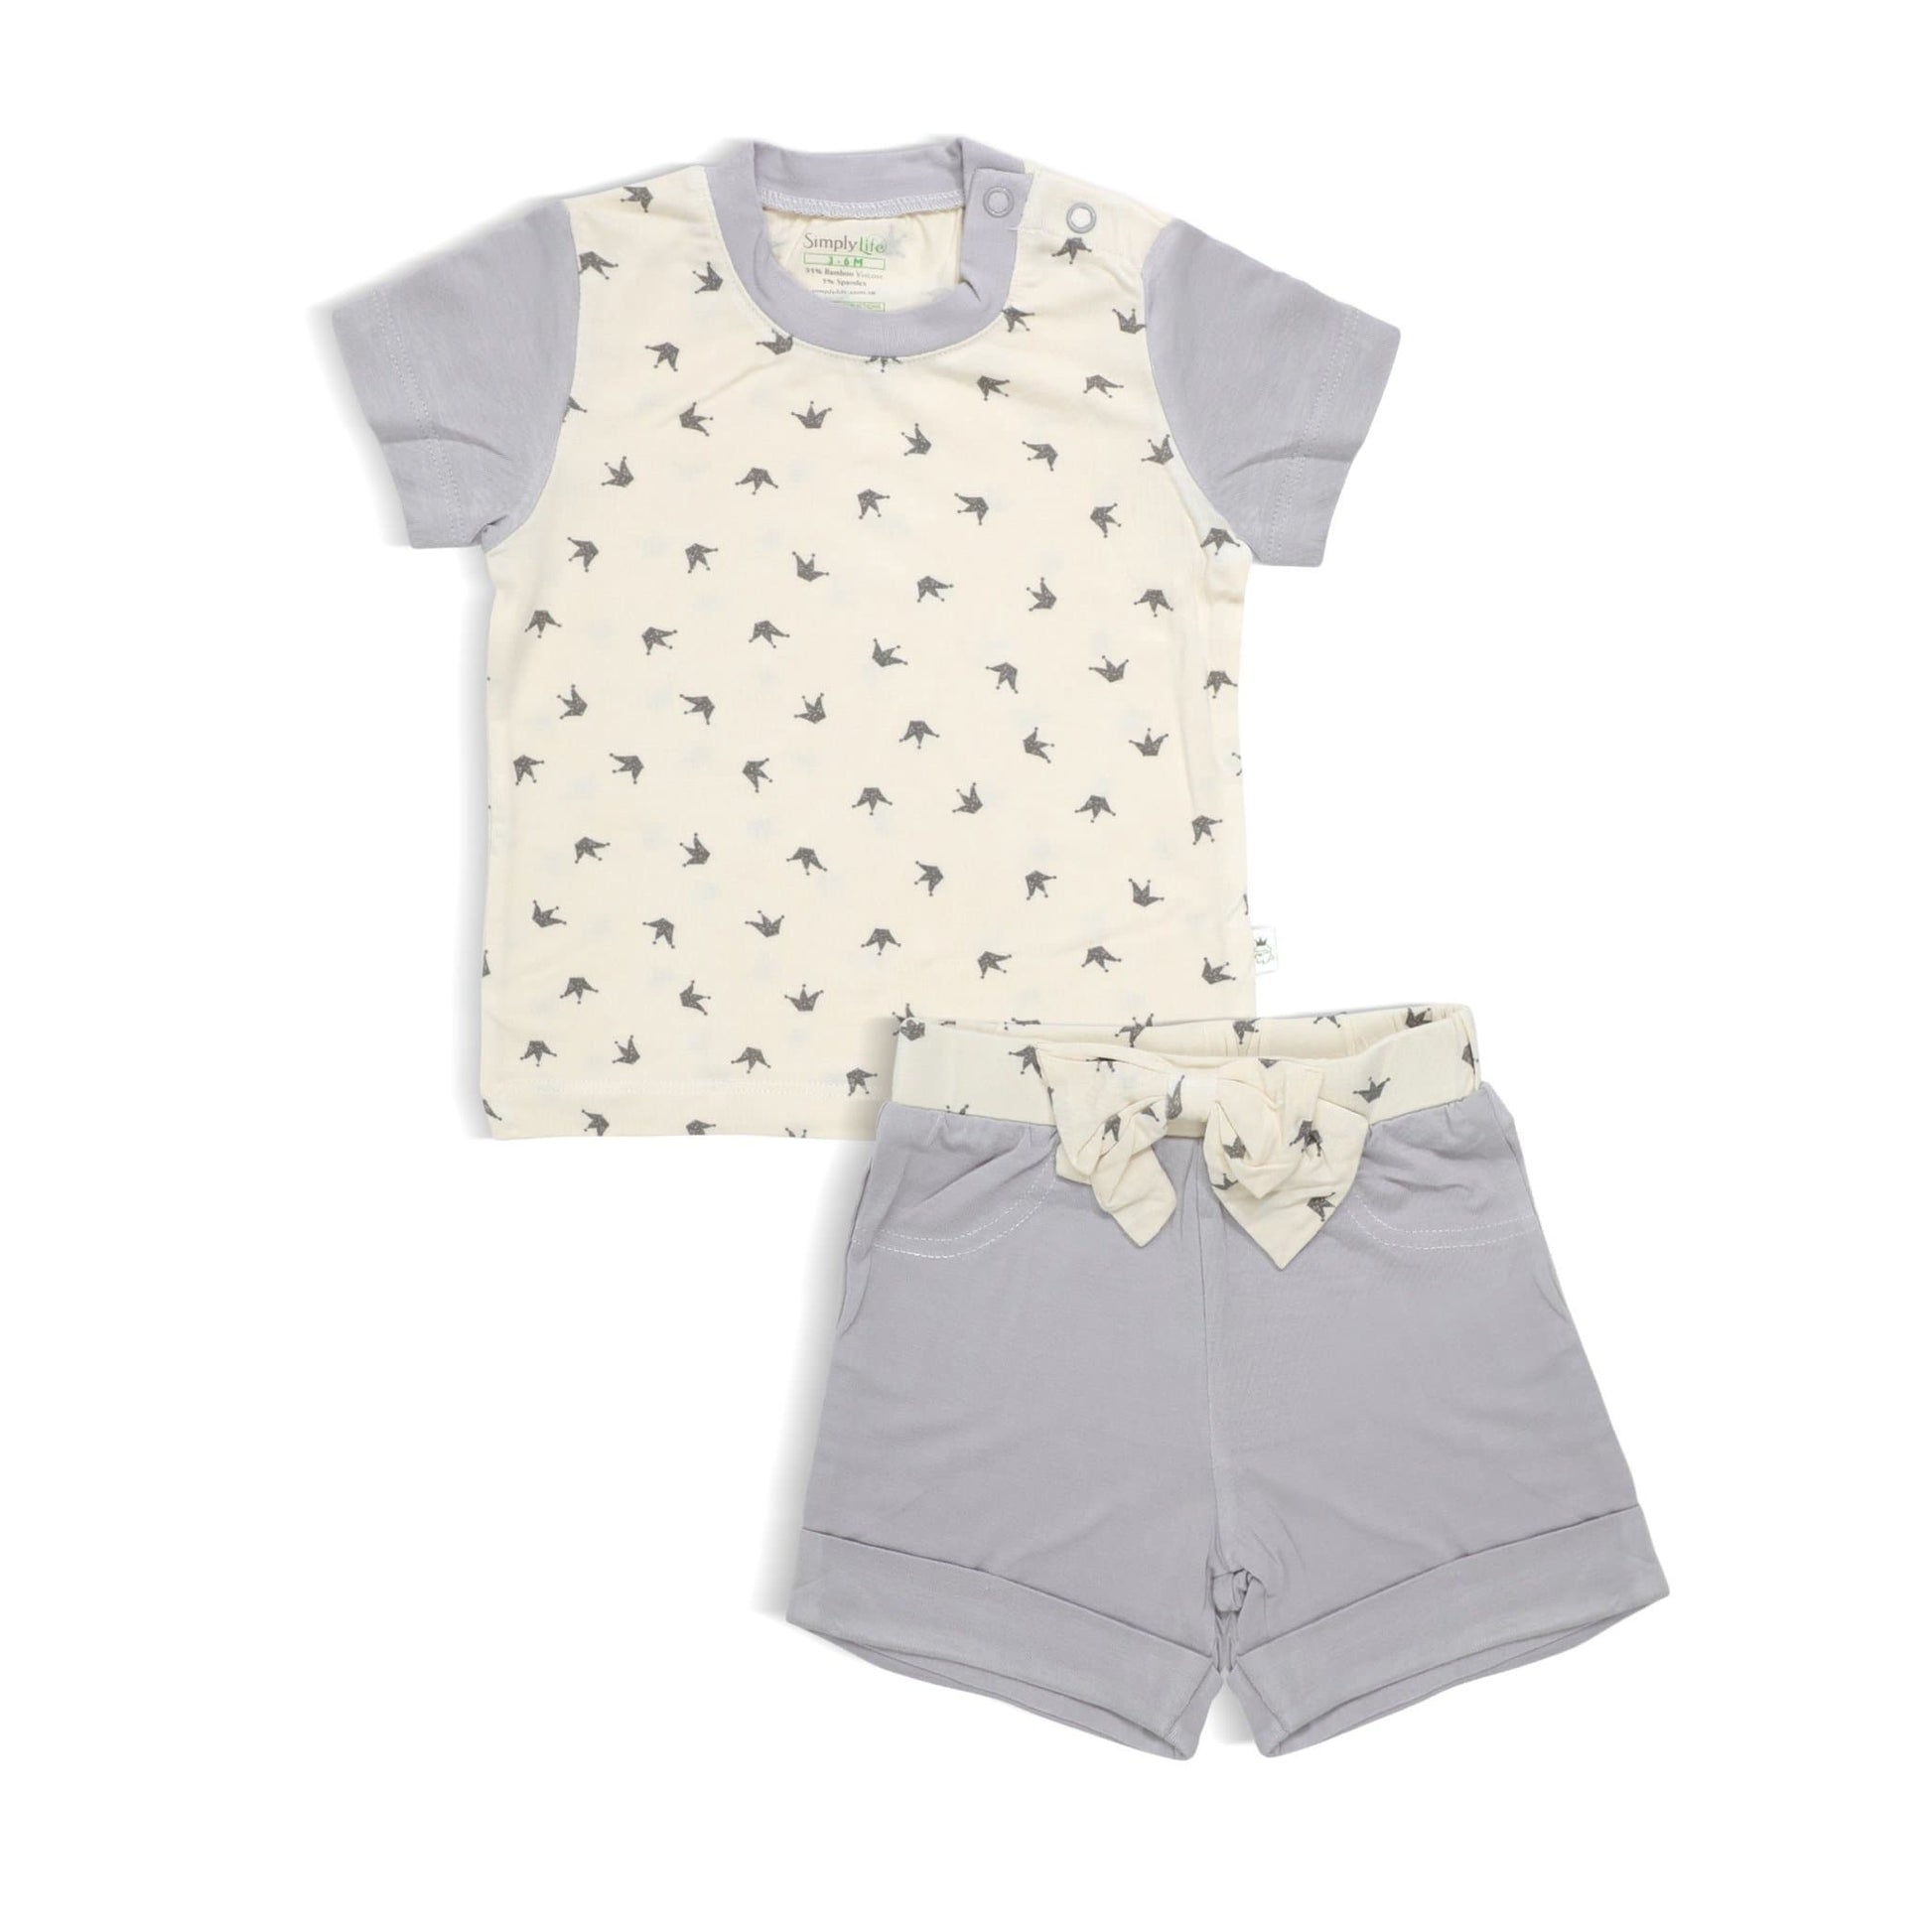 Royale - Shorts & Tee set by simplylifebaby